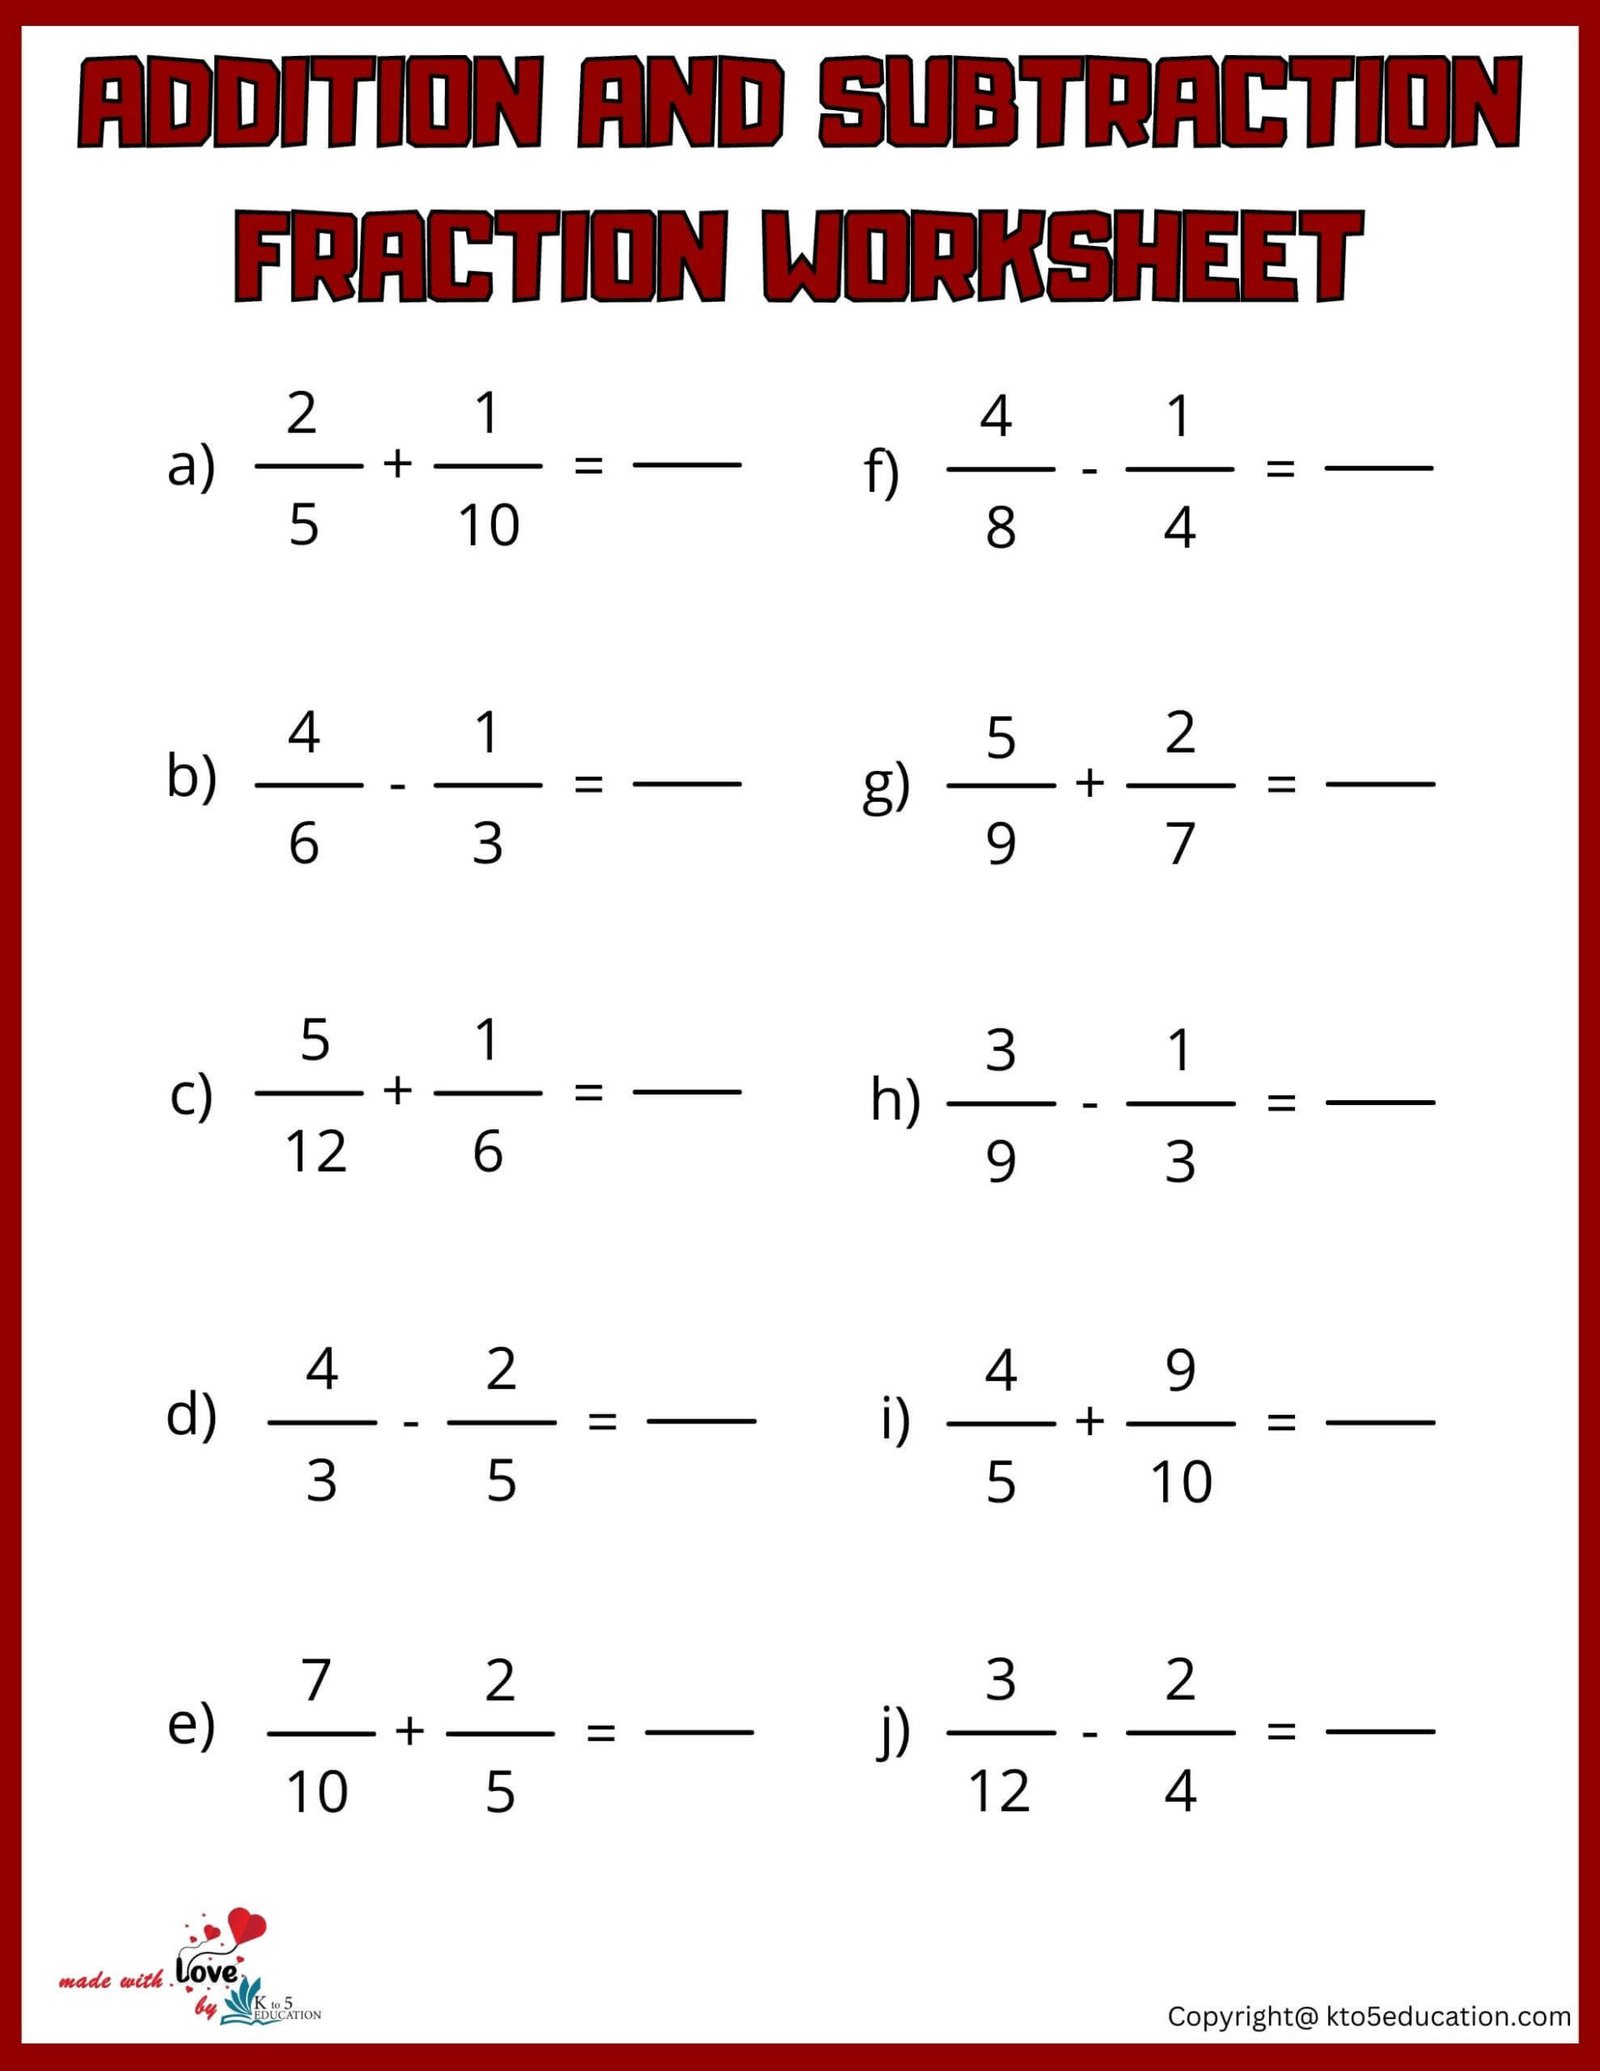 addition-and-subtraction-fraction-worksheets-free